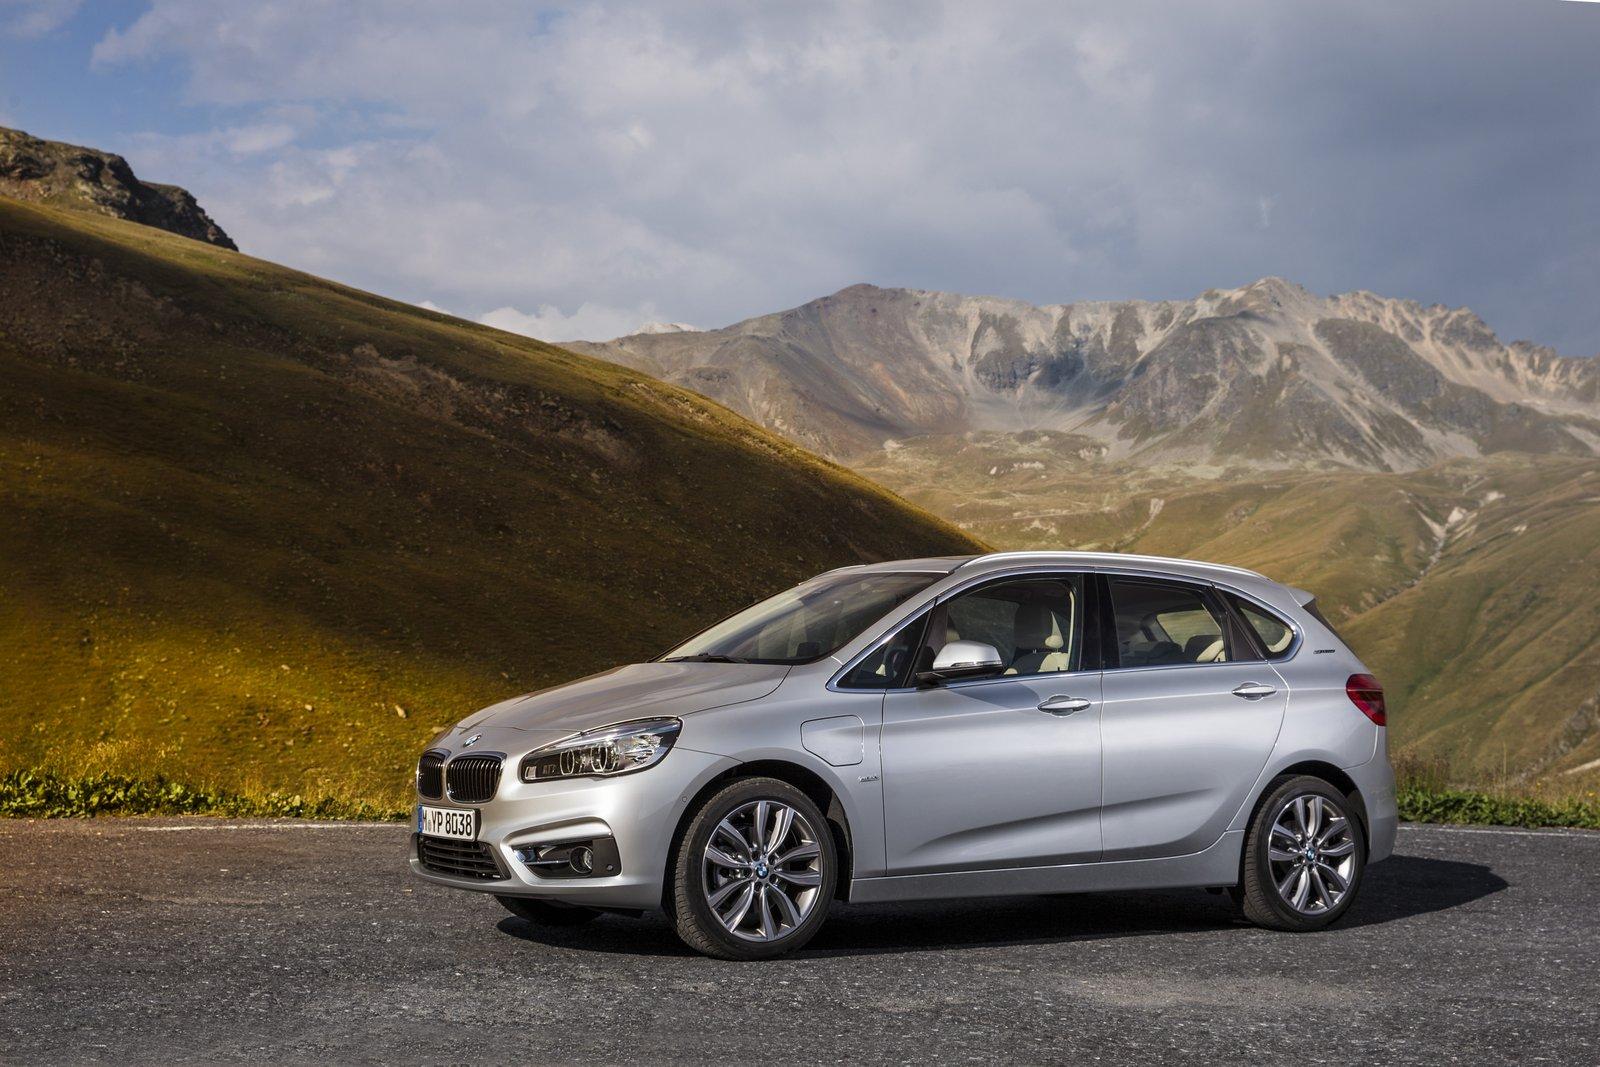 2016 BMW 225xe RESM GALERS